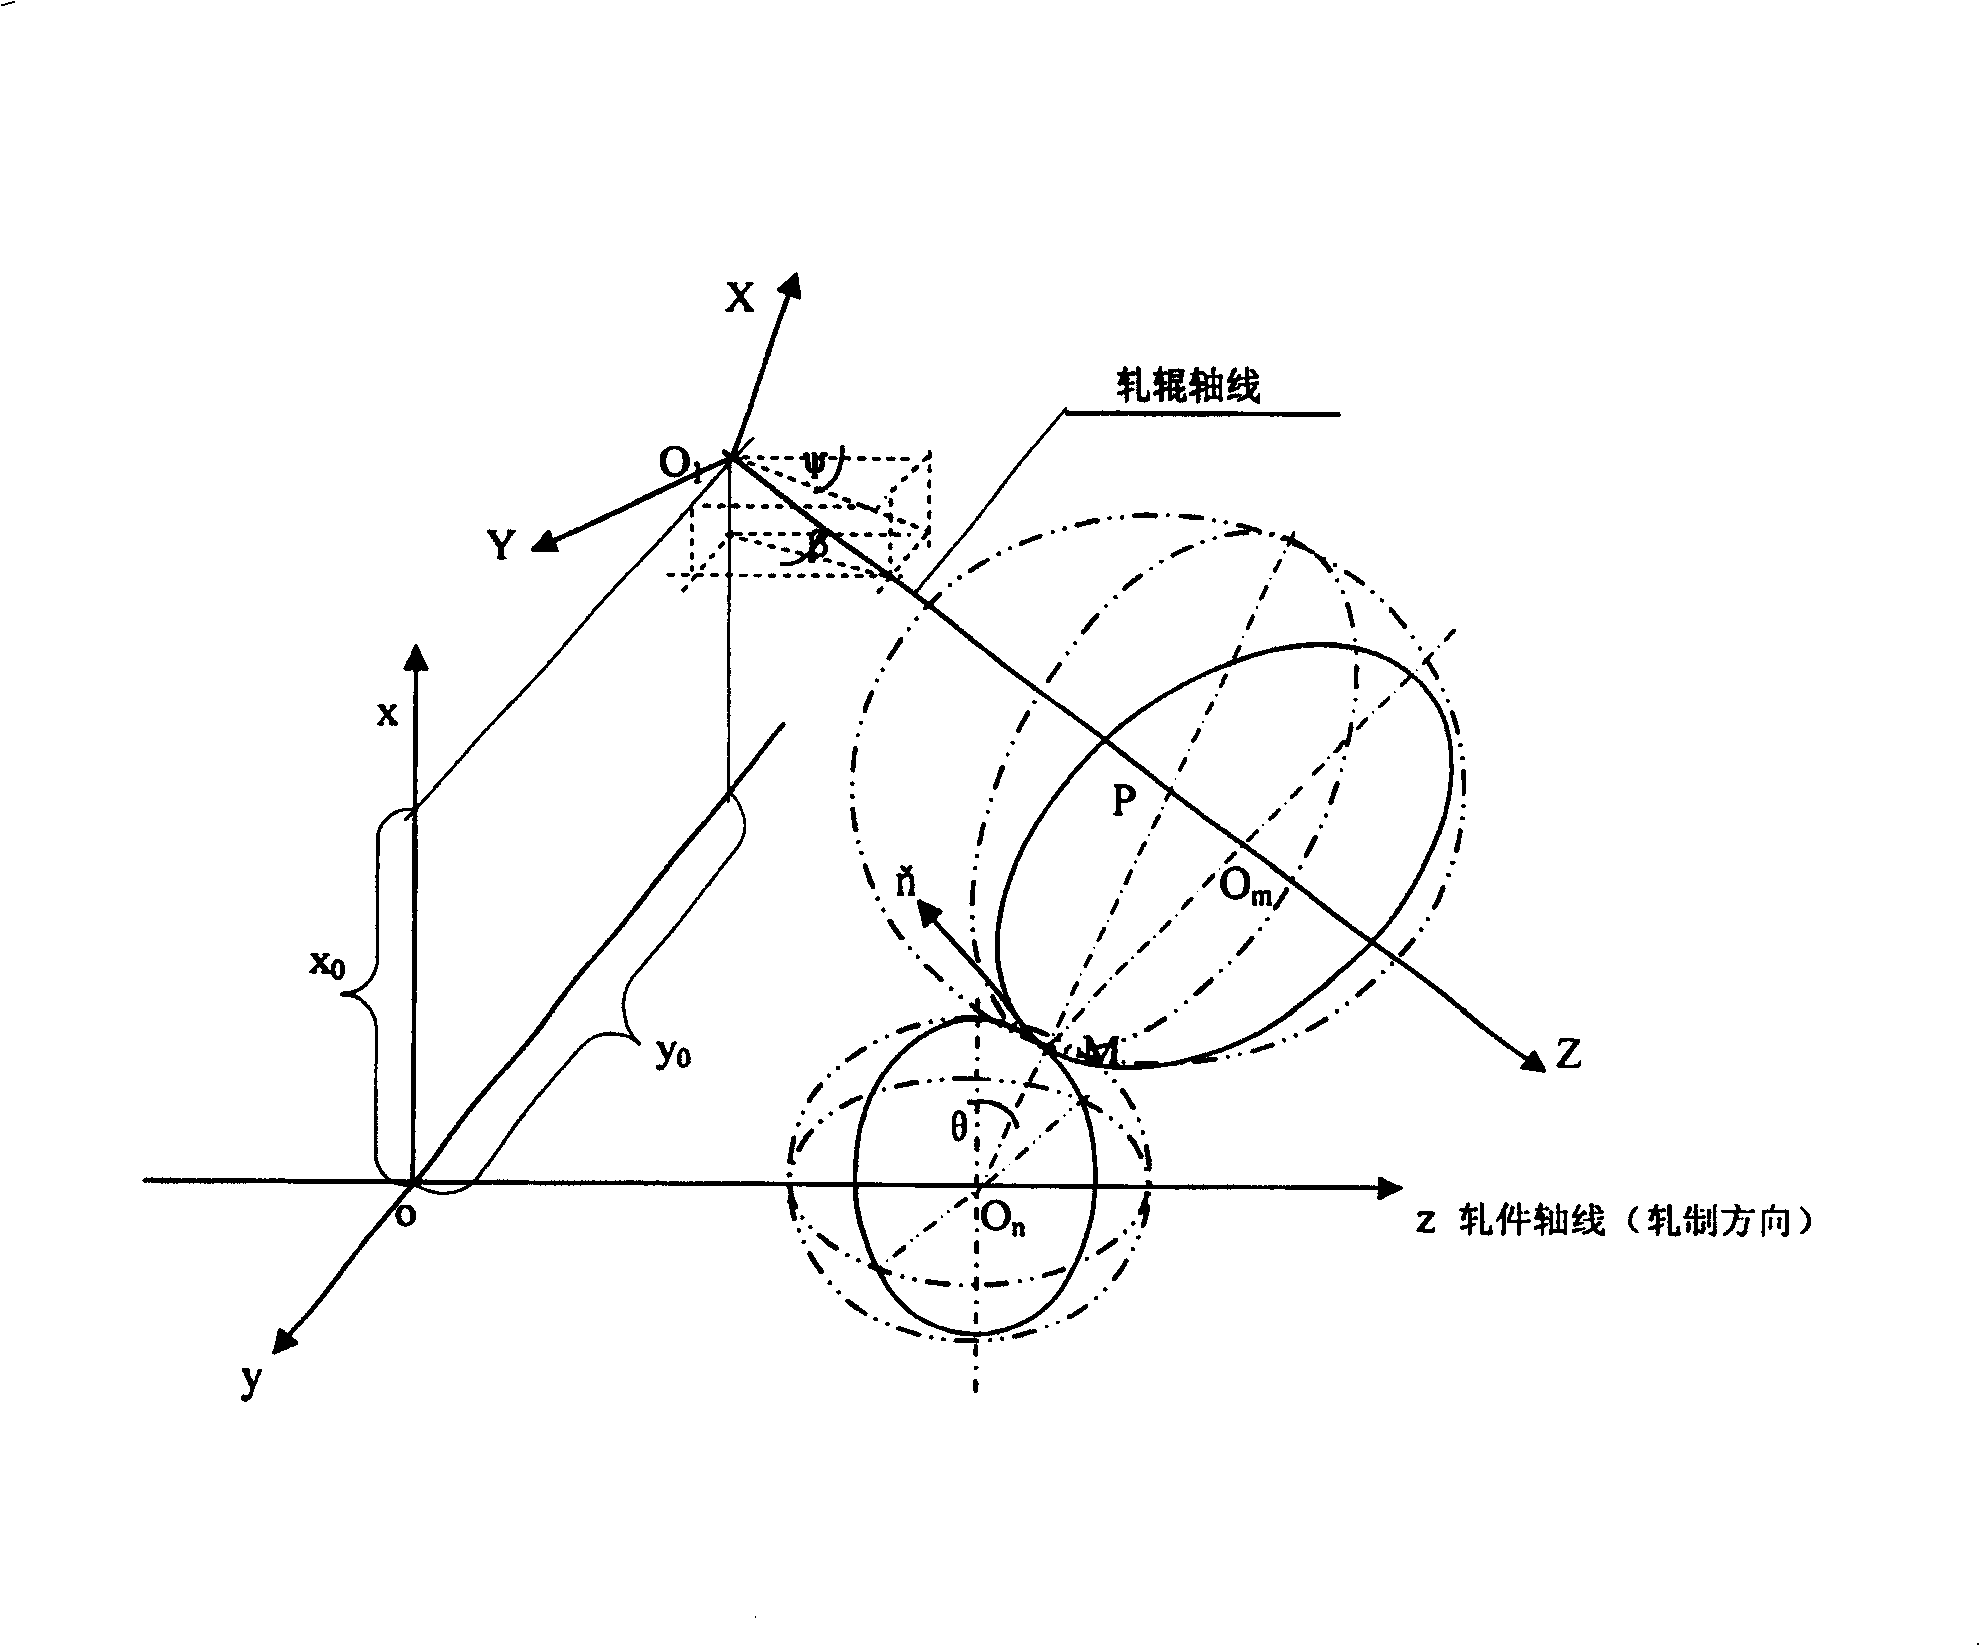 Geometric model of new elongater for skew rolling tubular products